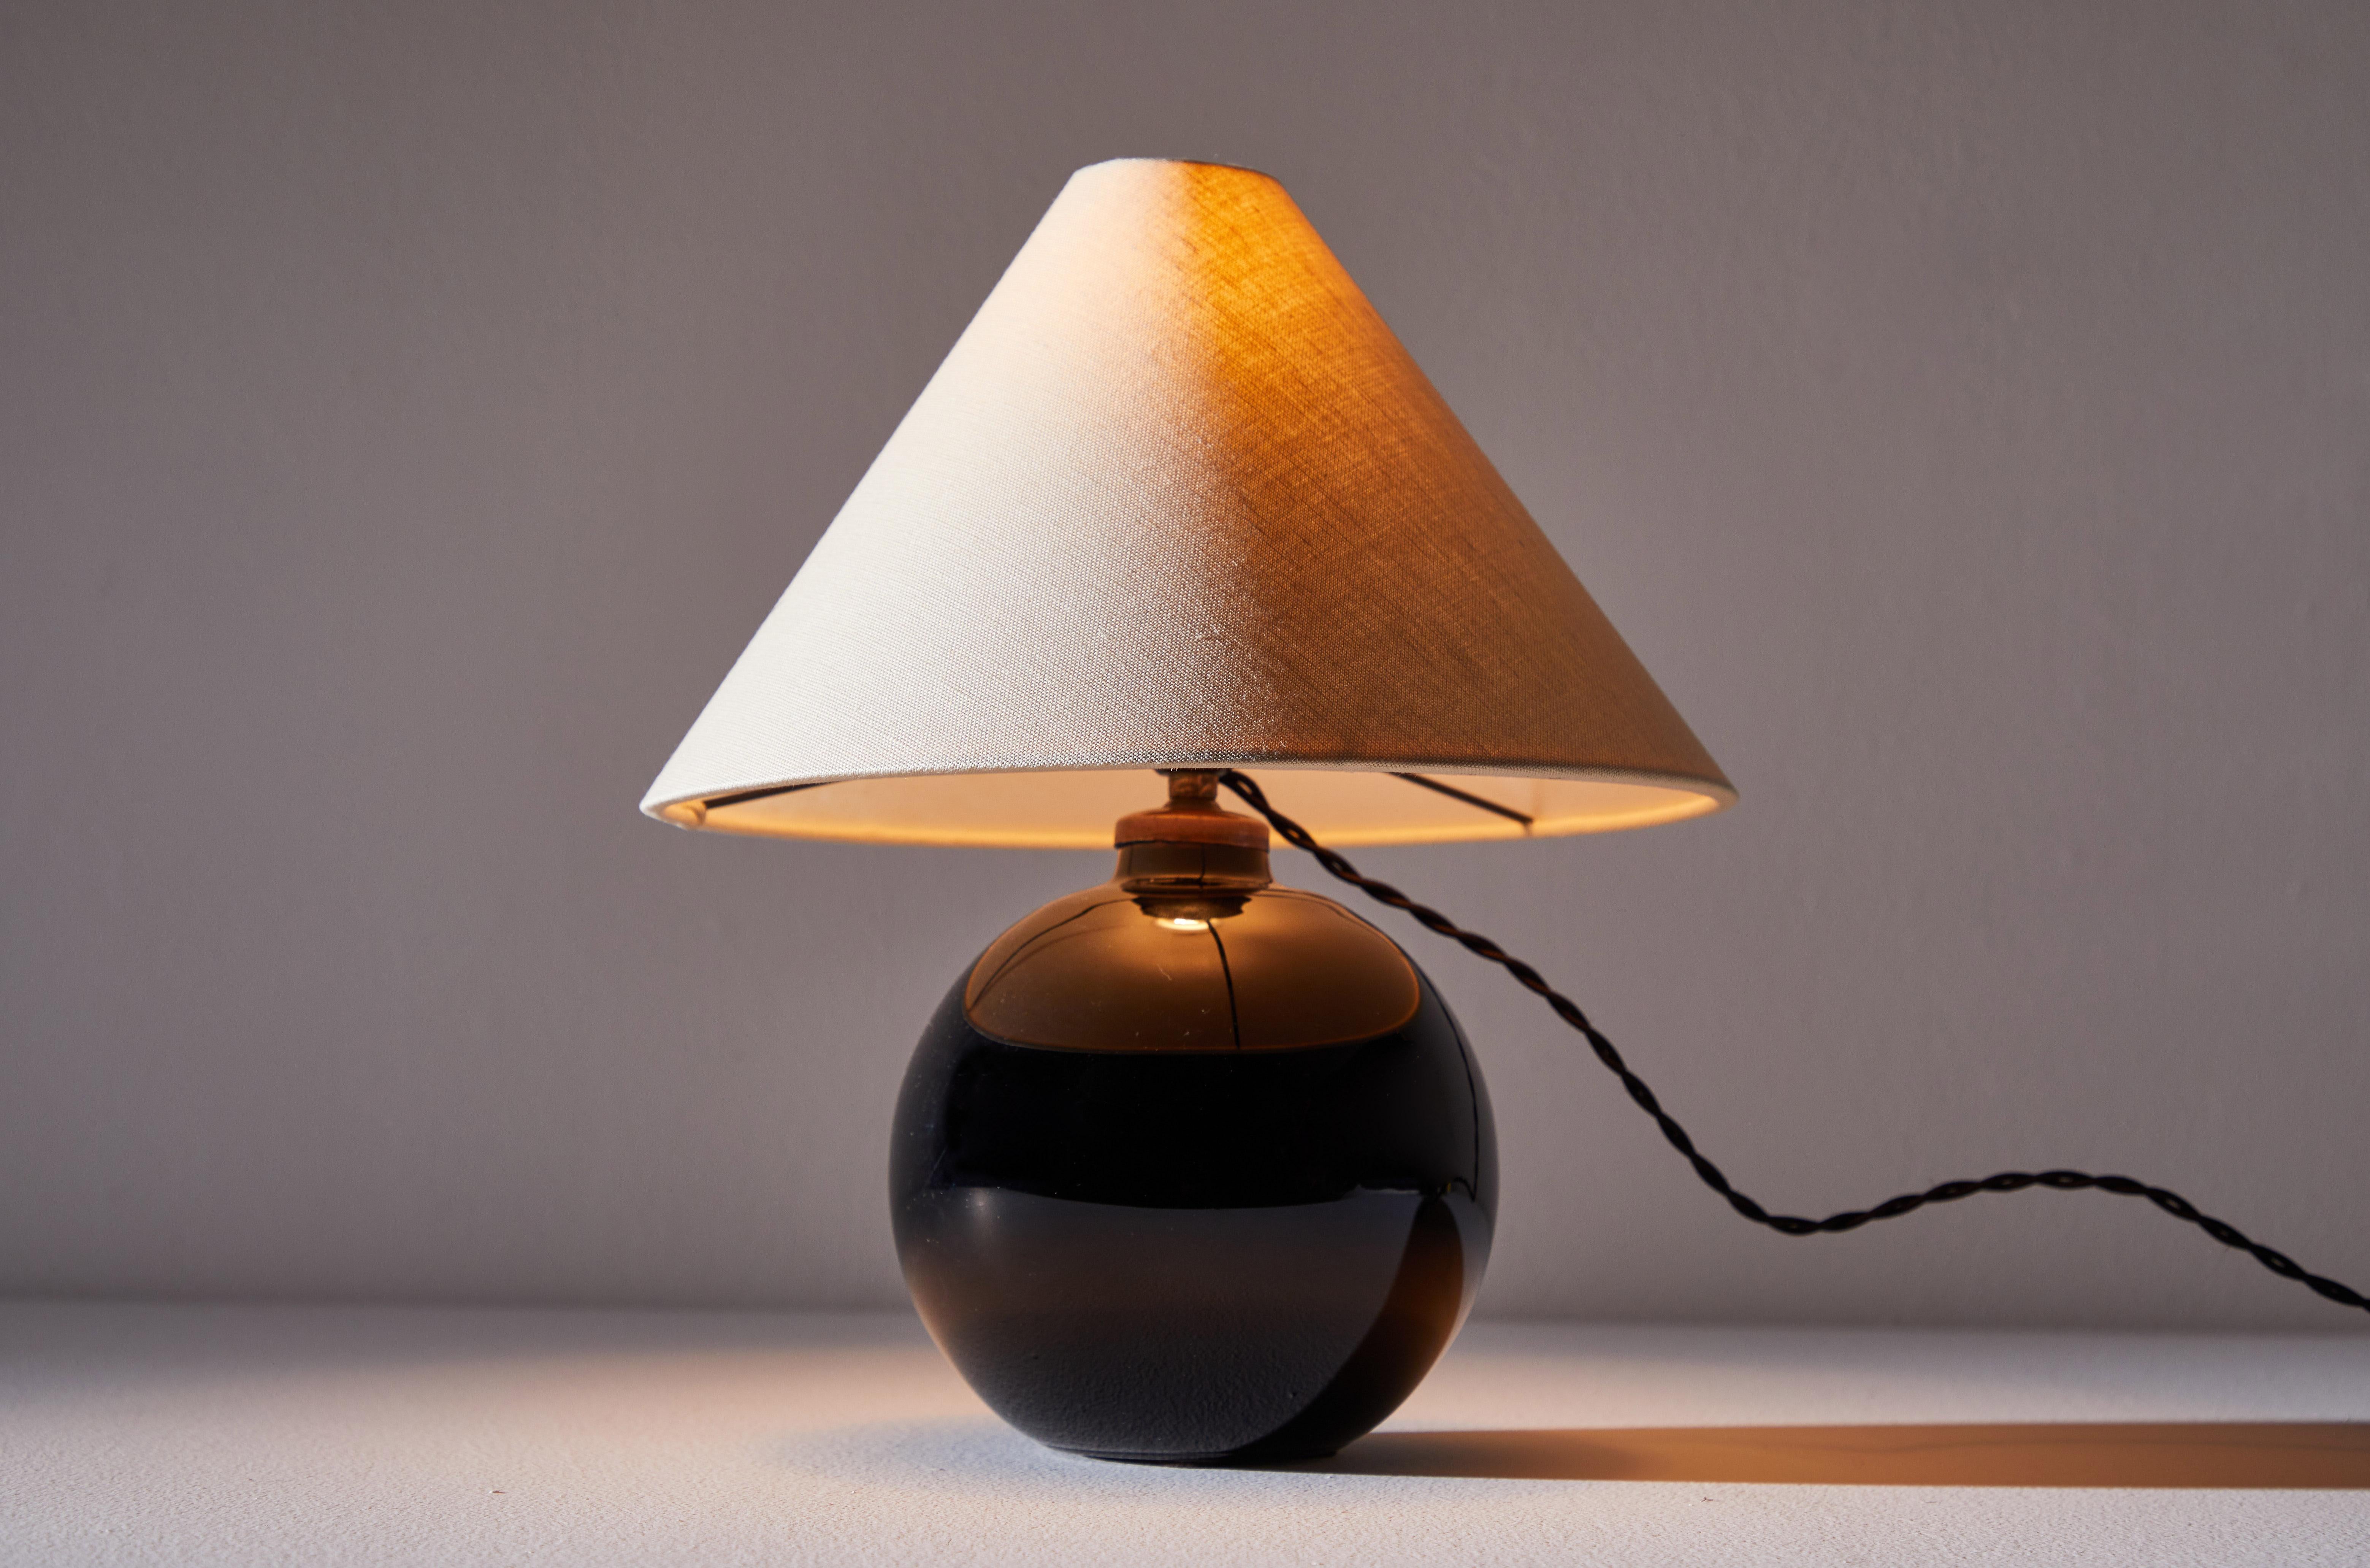 Spherical table lamp by Jacques Adnet. Designed and manufactured in France, circa 1930s. Original glass, brass and custom natural linen shade. Rewired for U.S. standards with French twist silk cord. This fixture has one socket. We recommend one